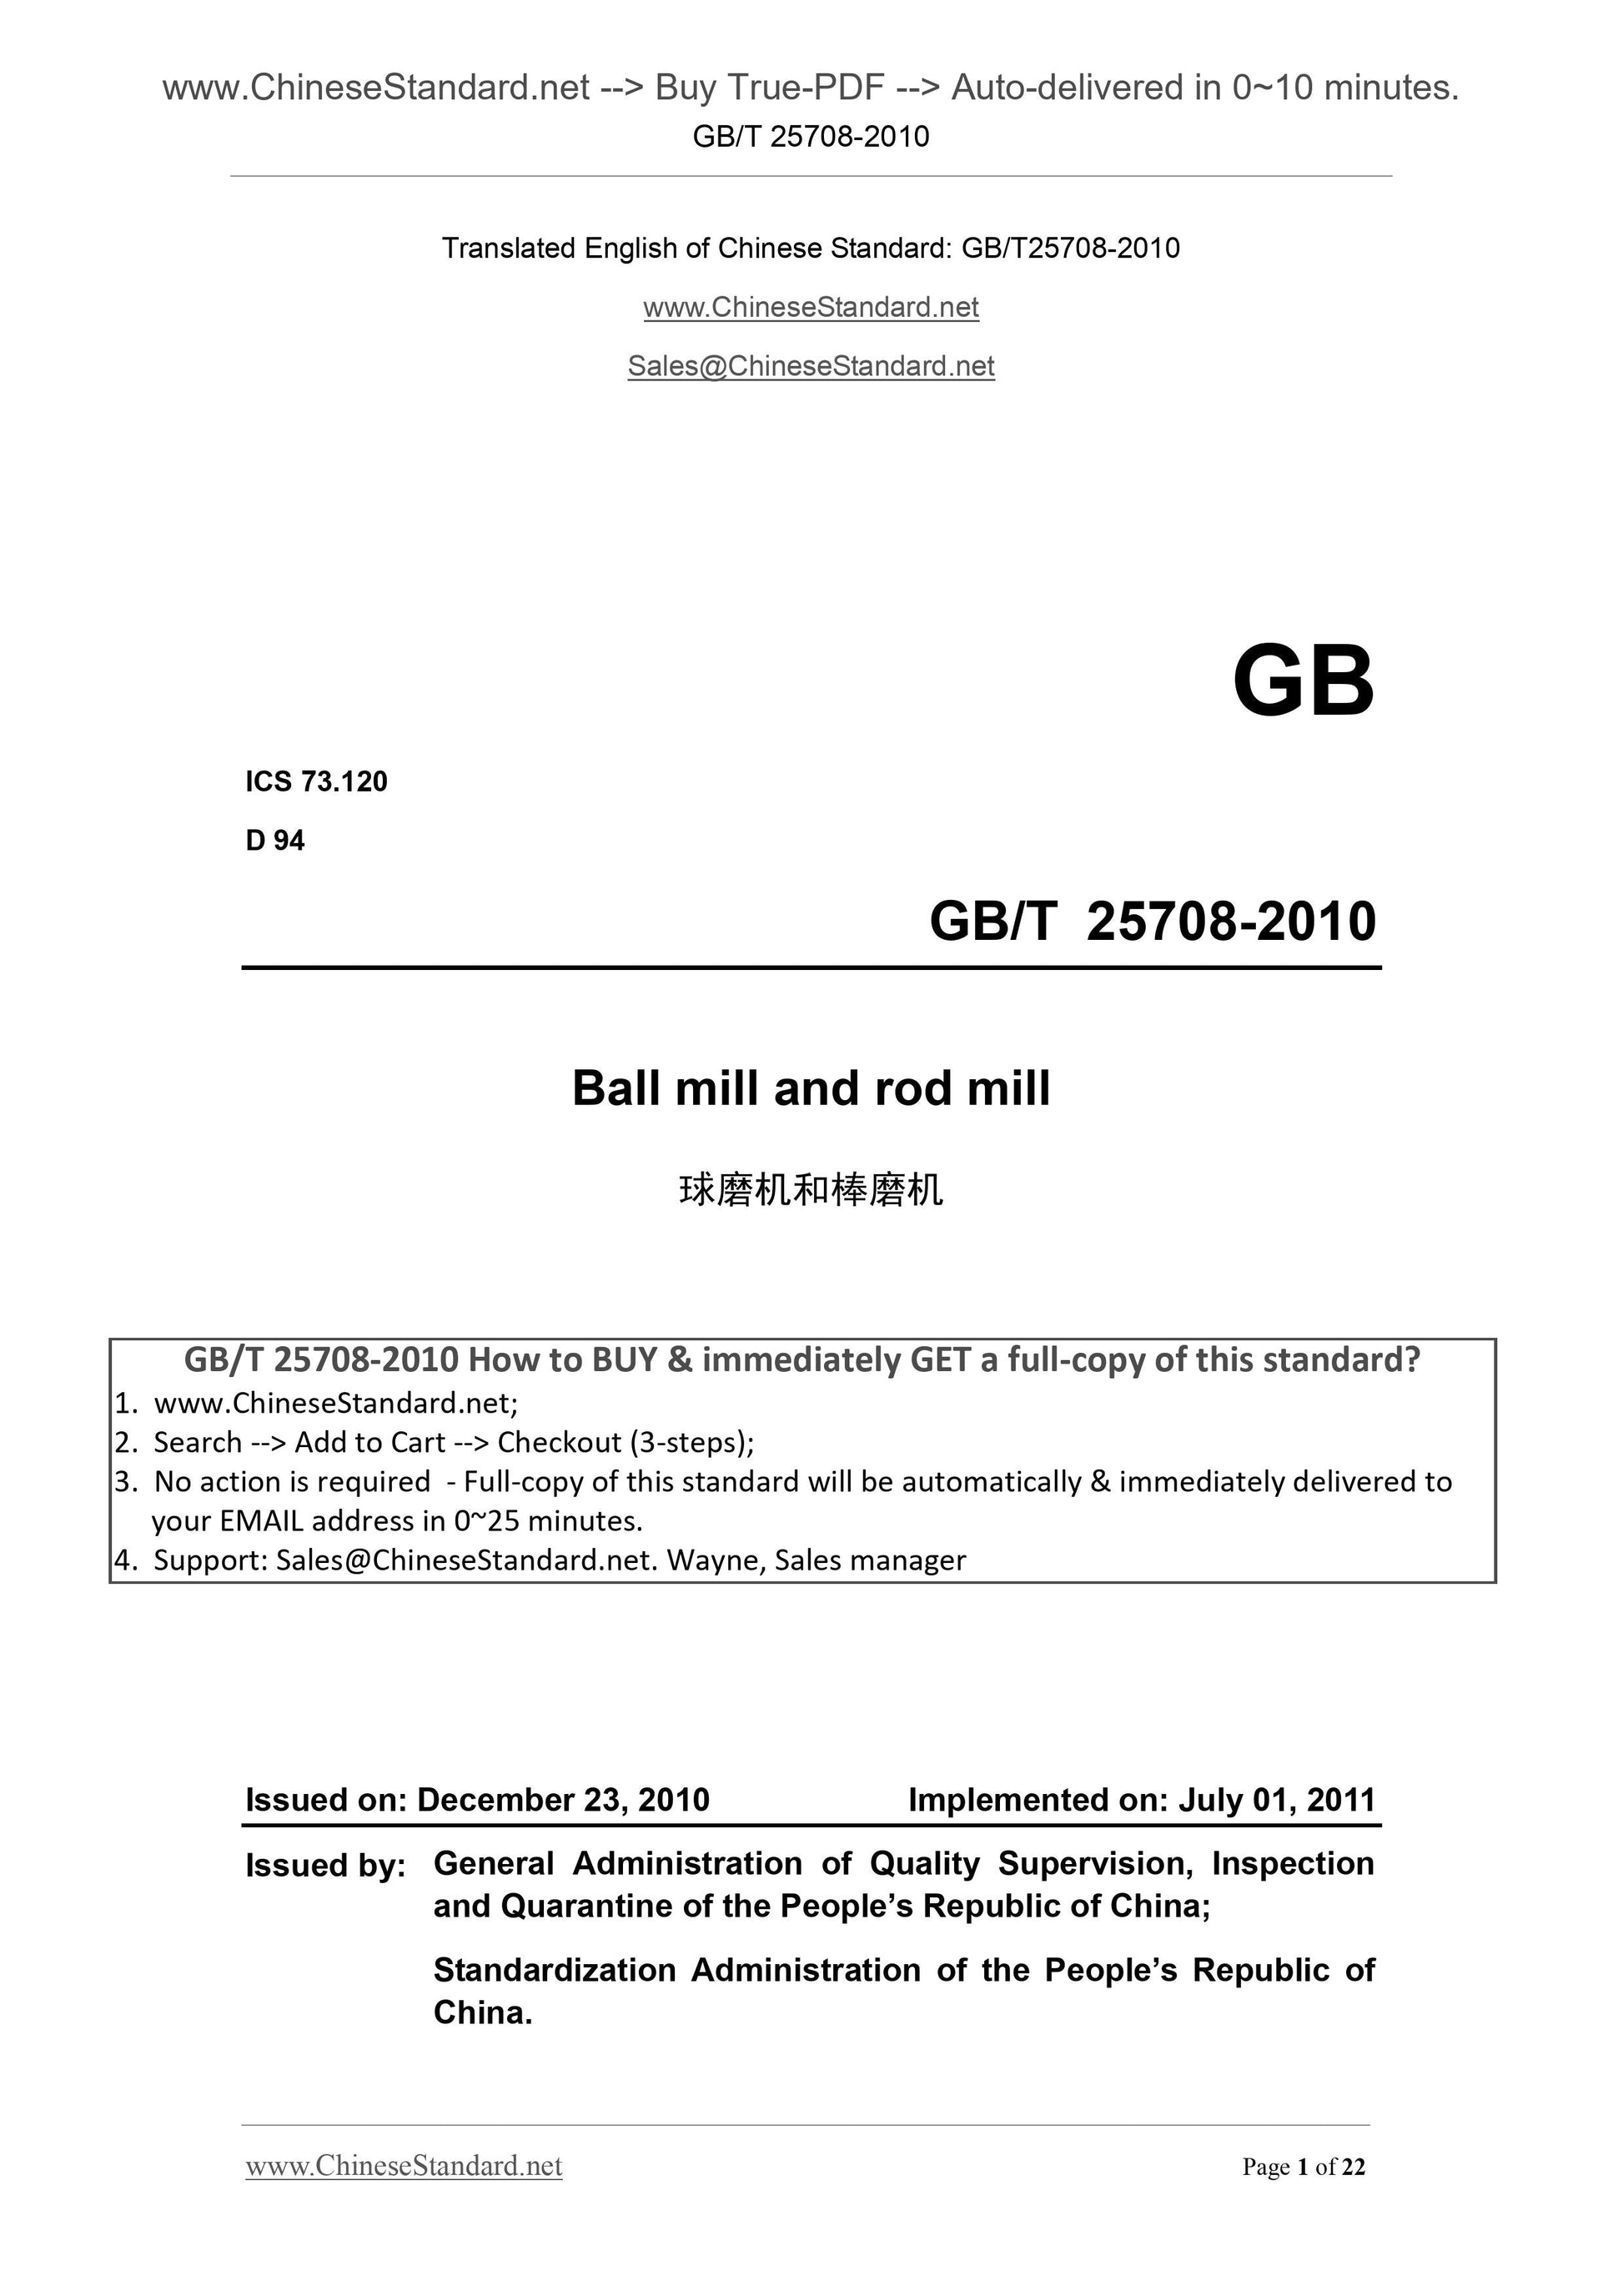 GB/T 25708-2010 Page 1